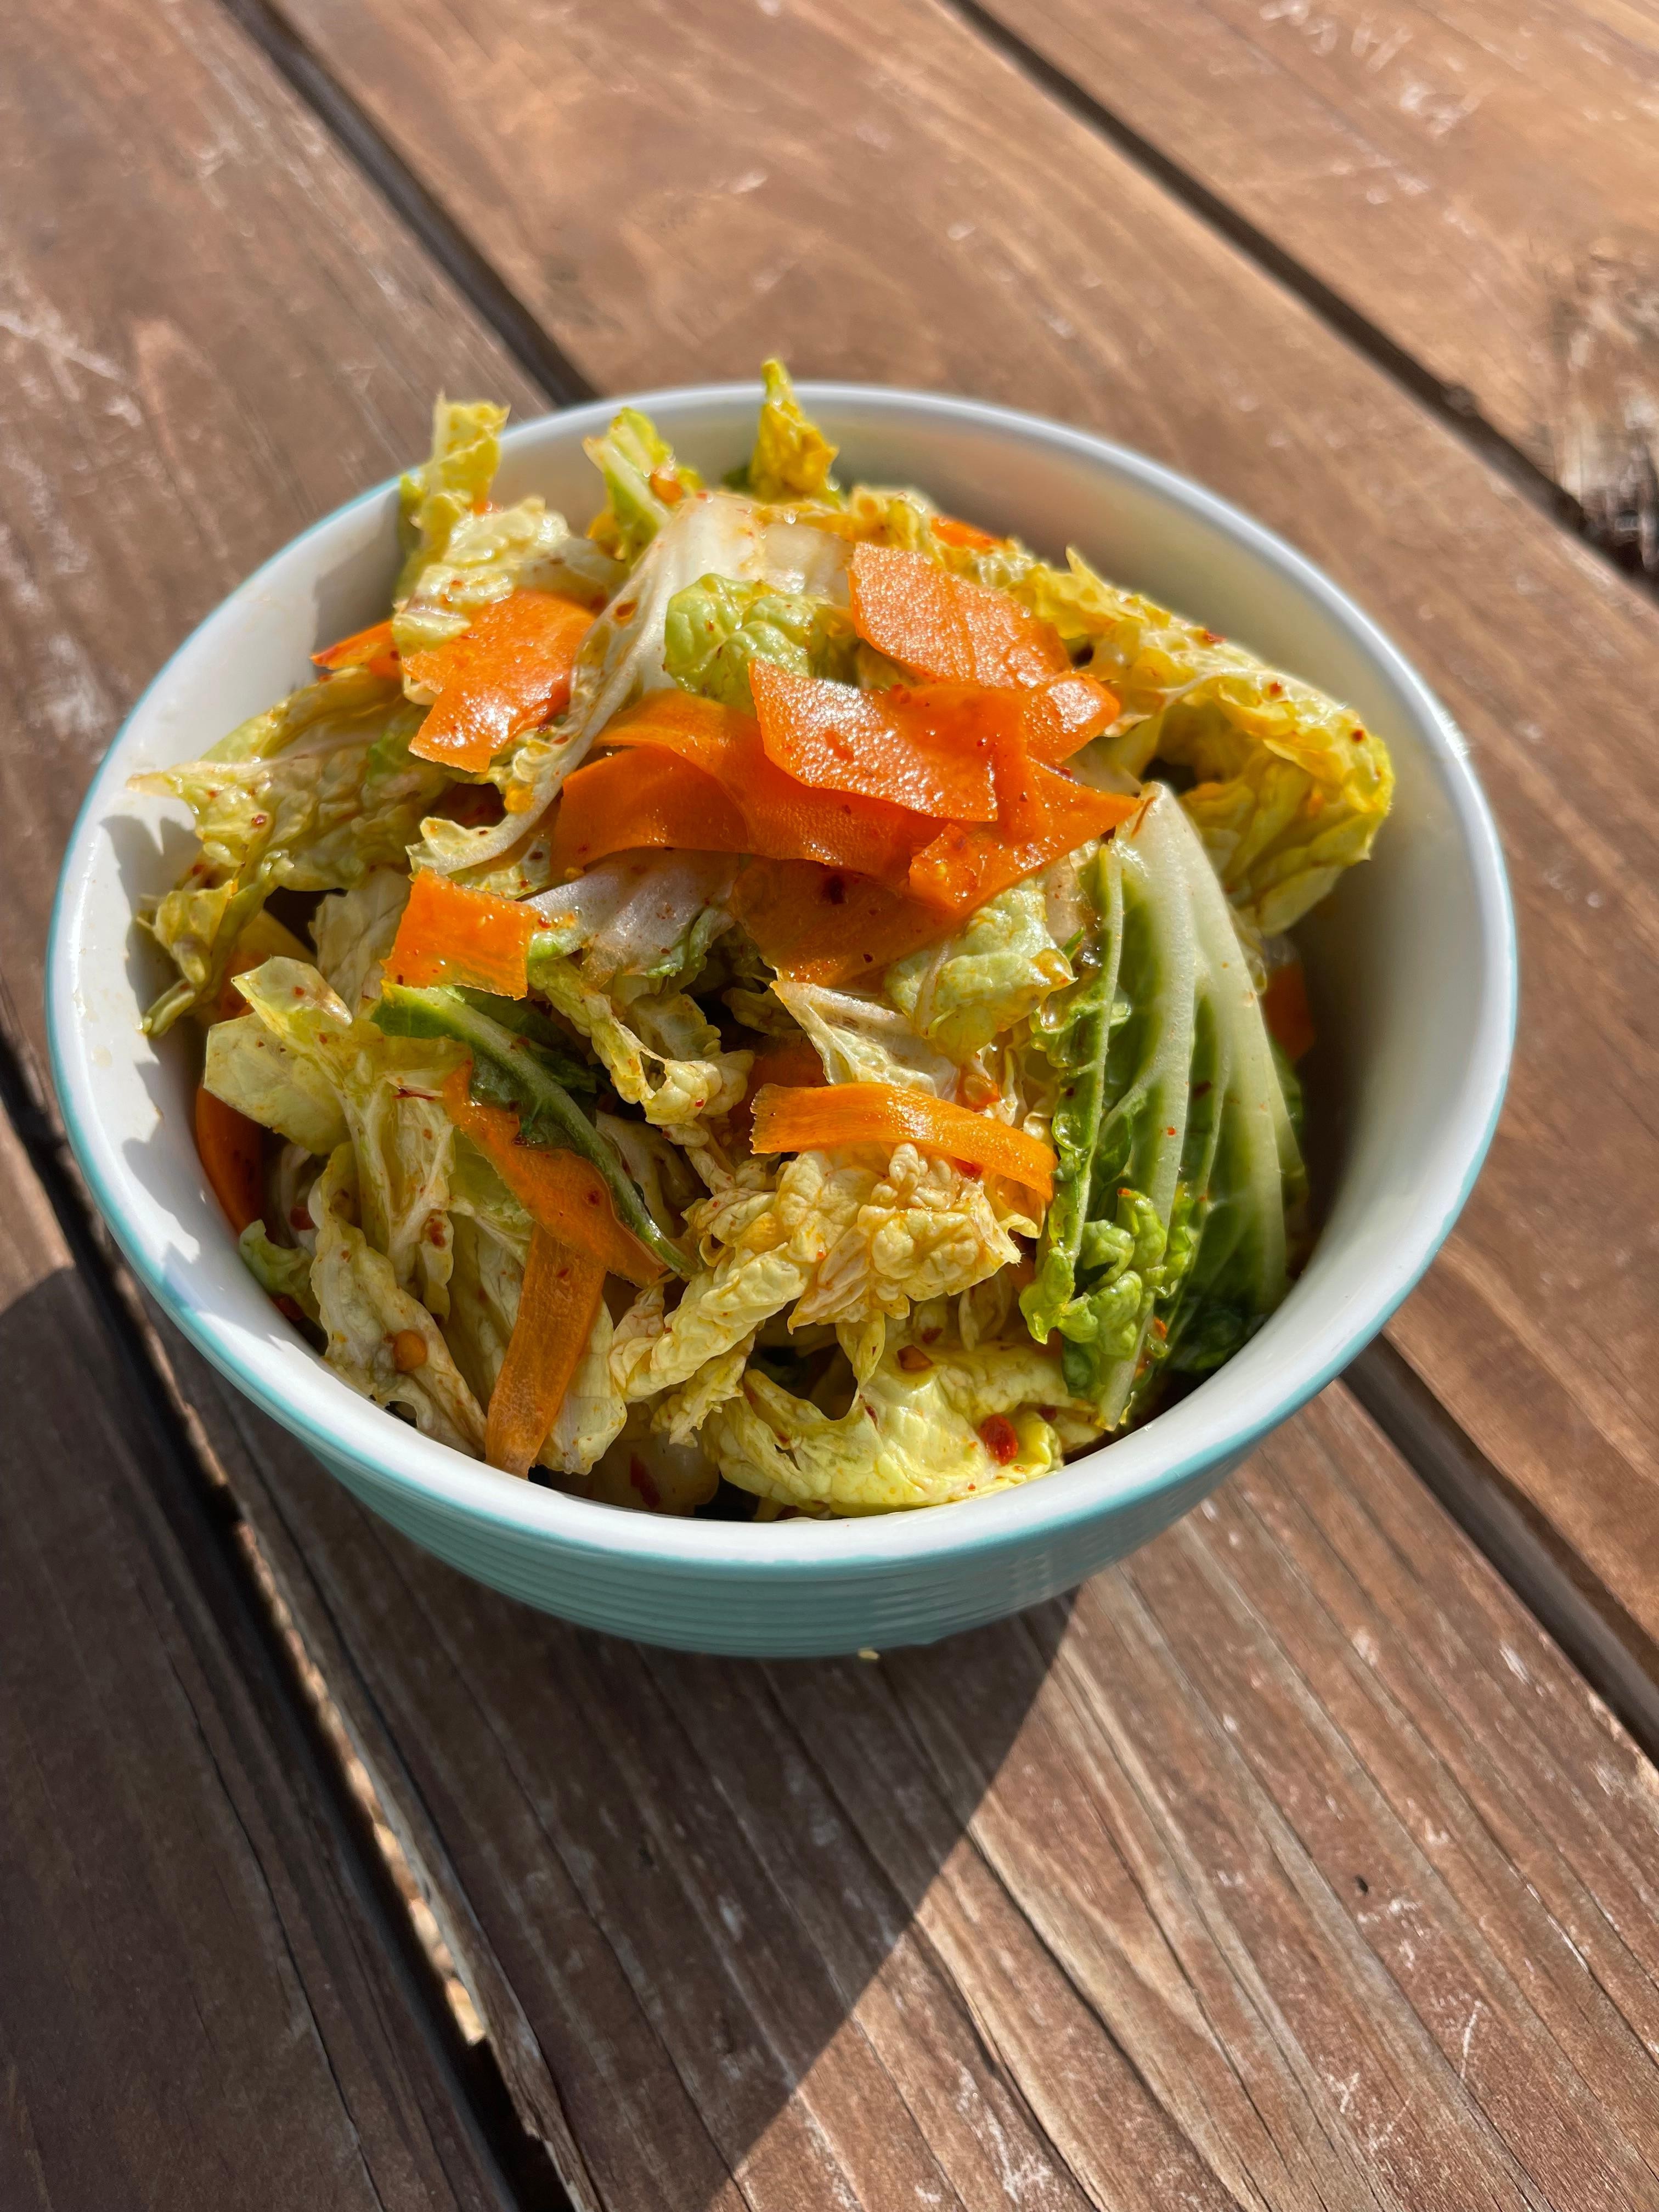 Cabbage & carrot salad